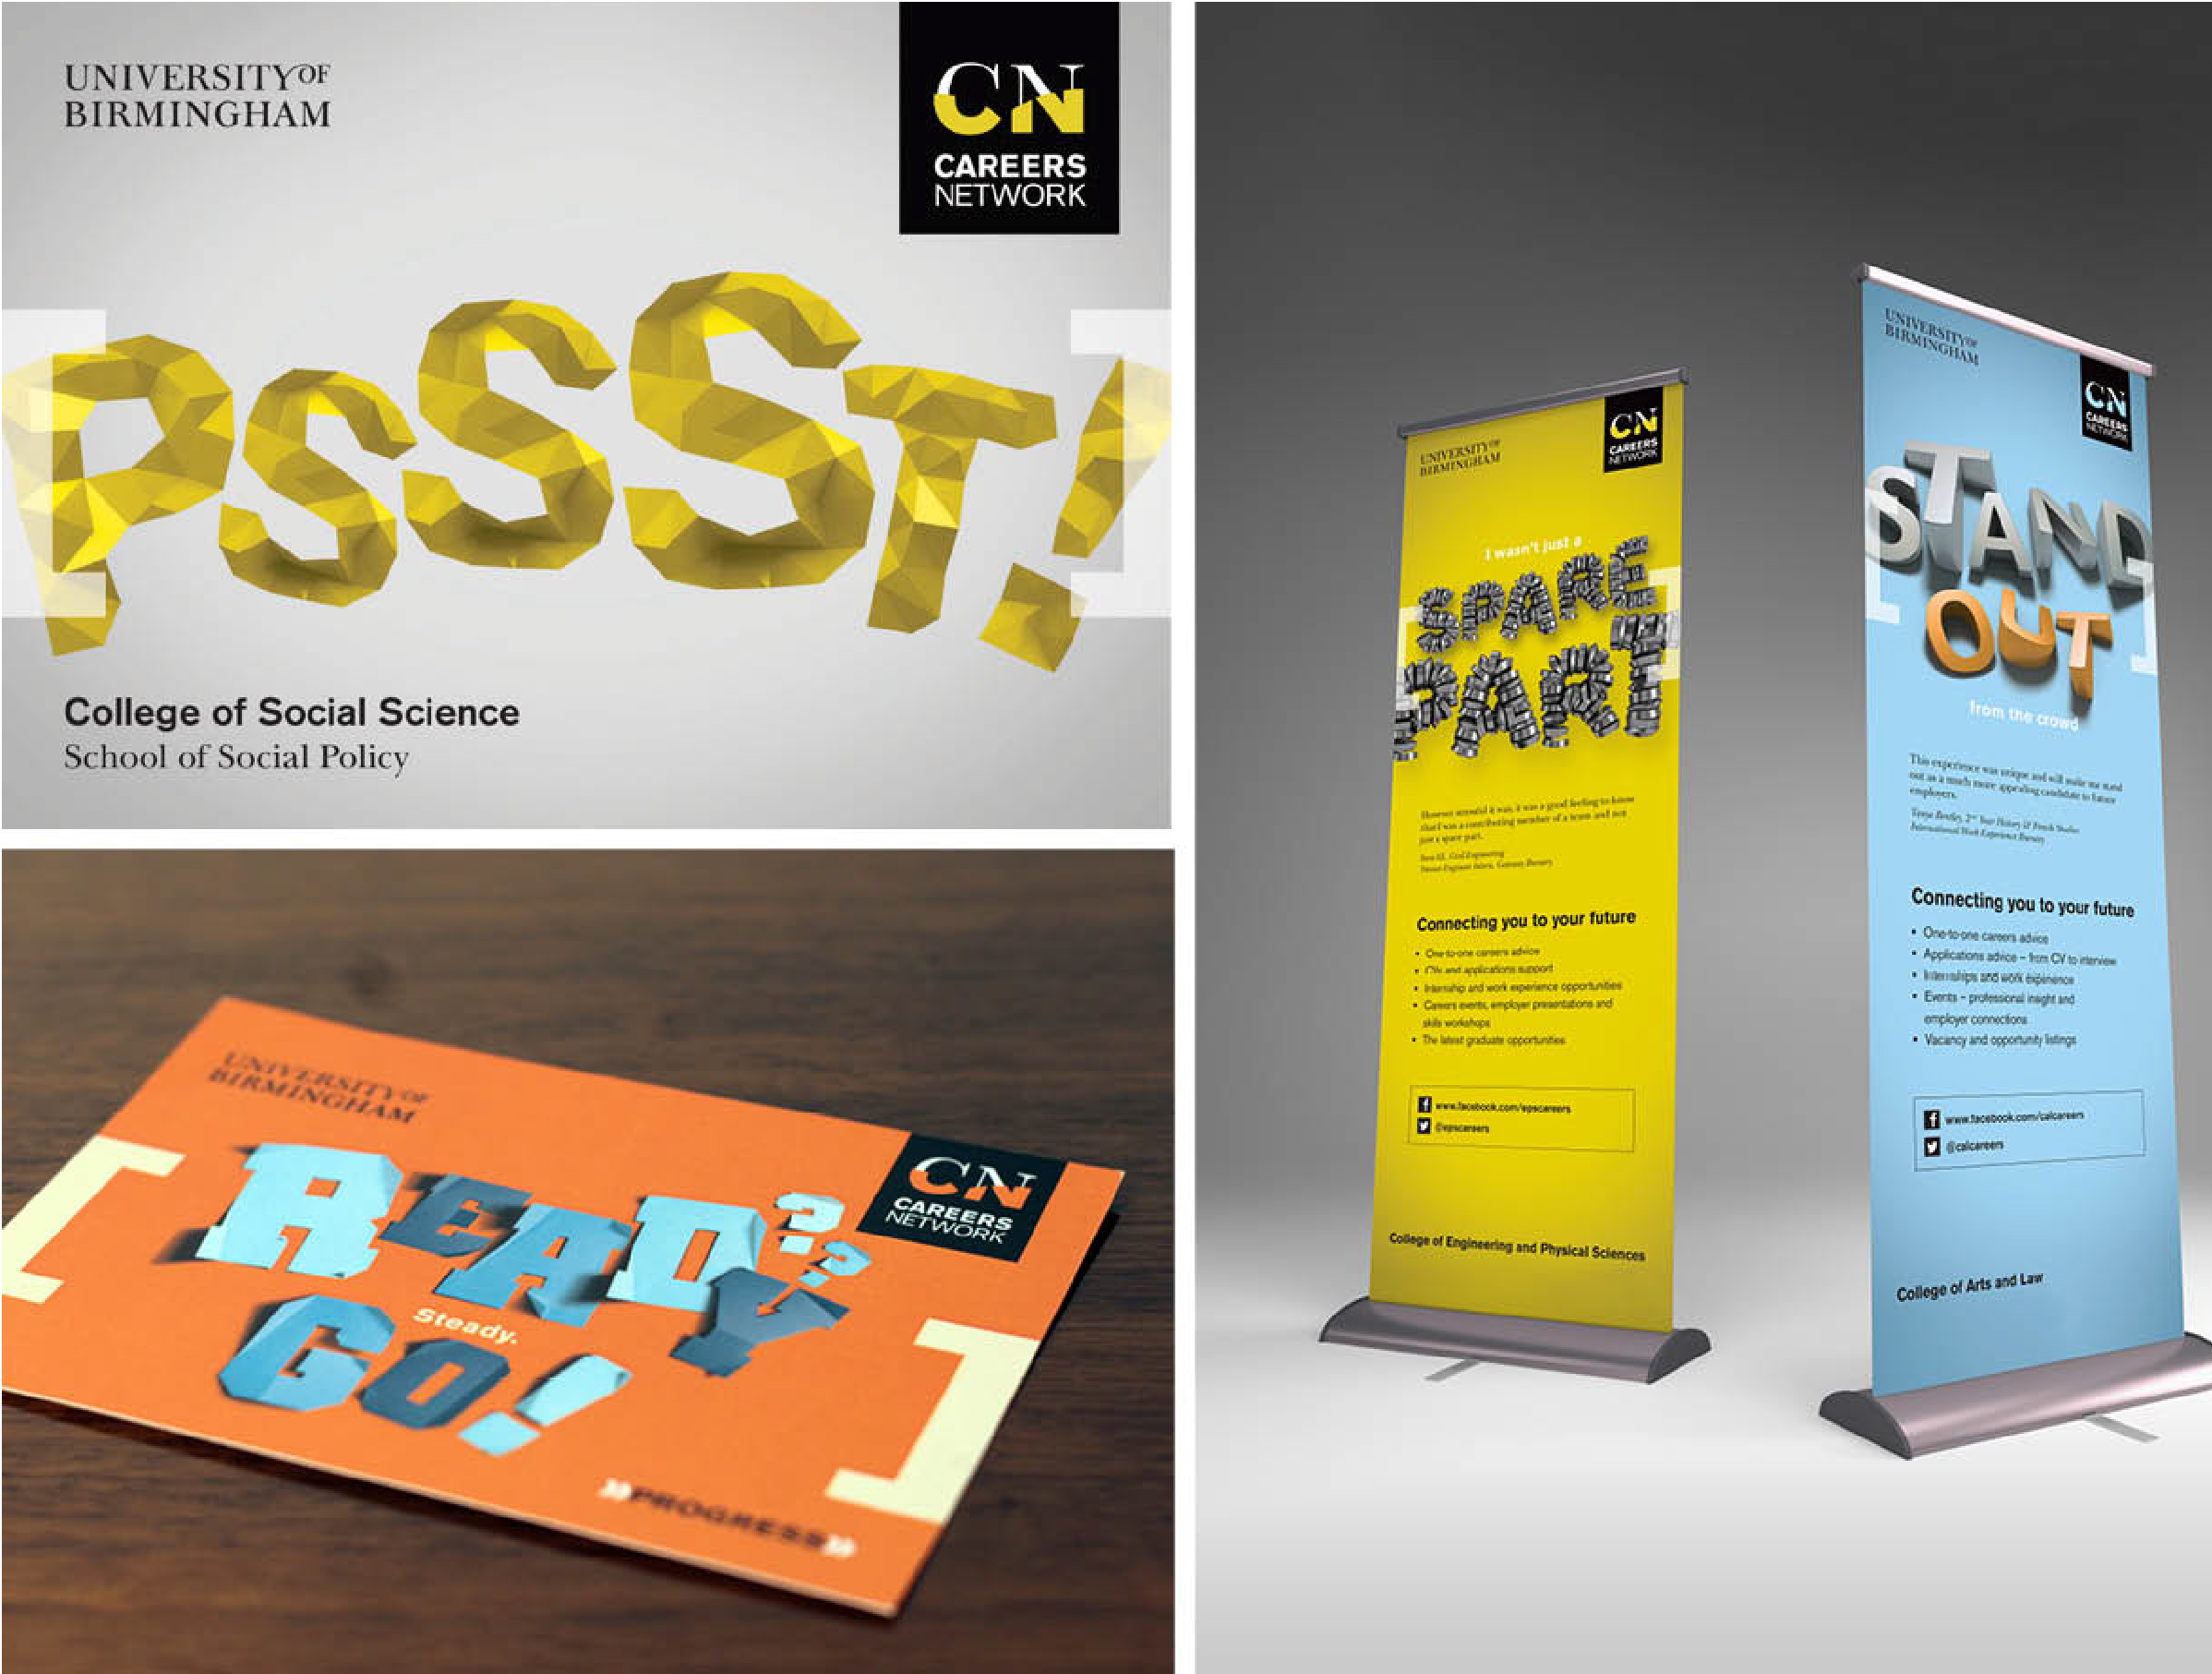 University of Birmingham Careers Network branding shown on marketing material and banner stands